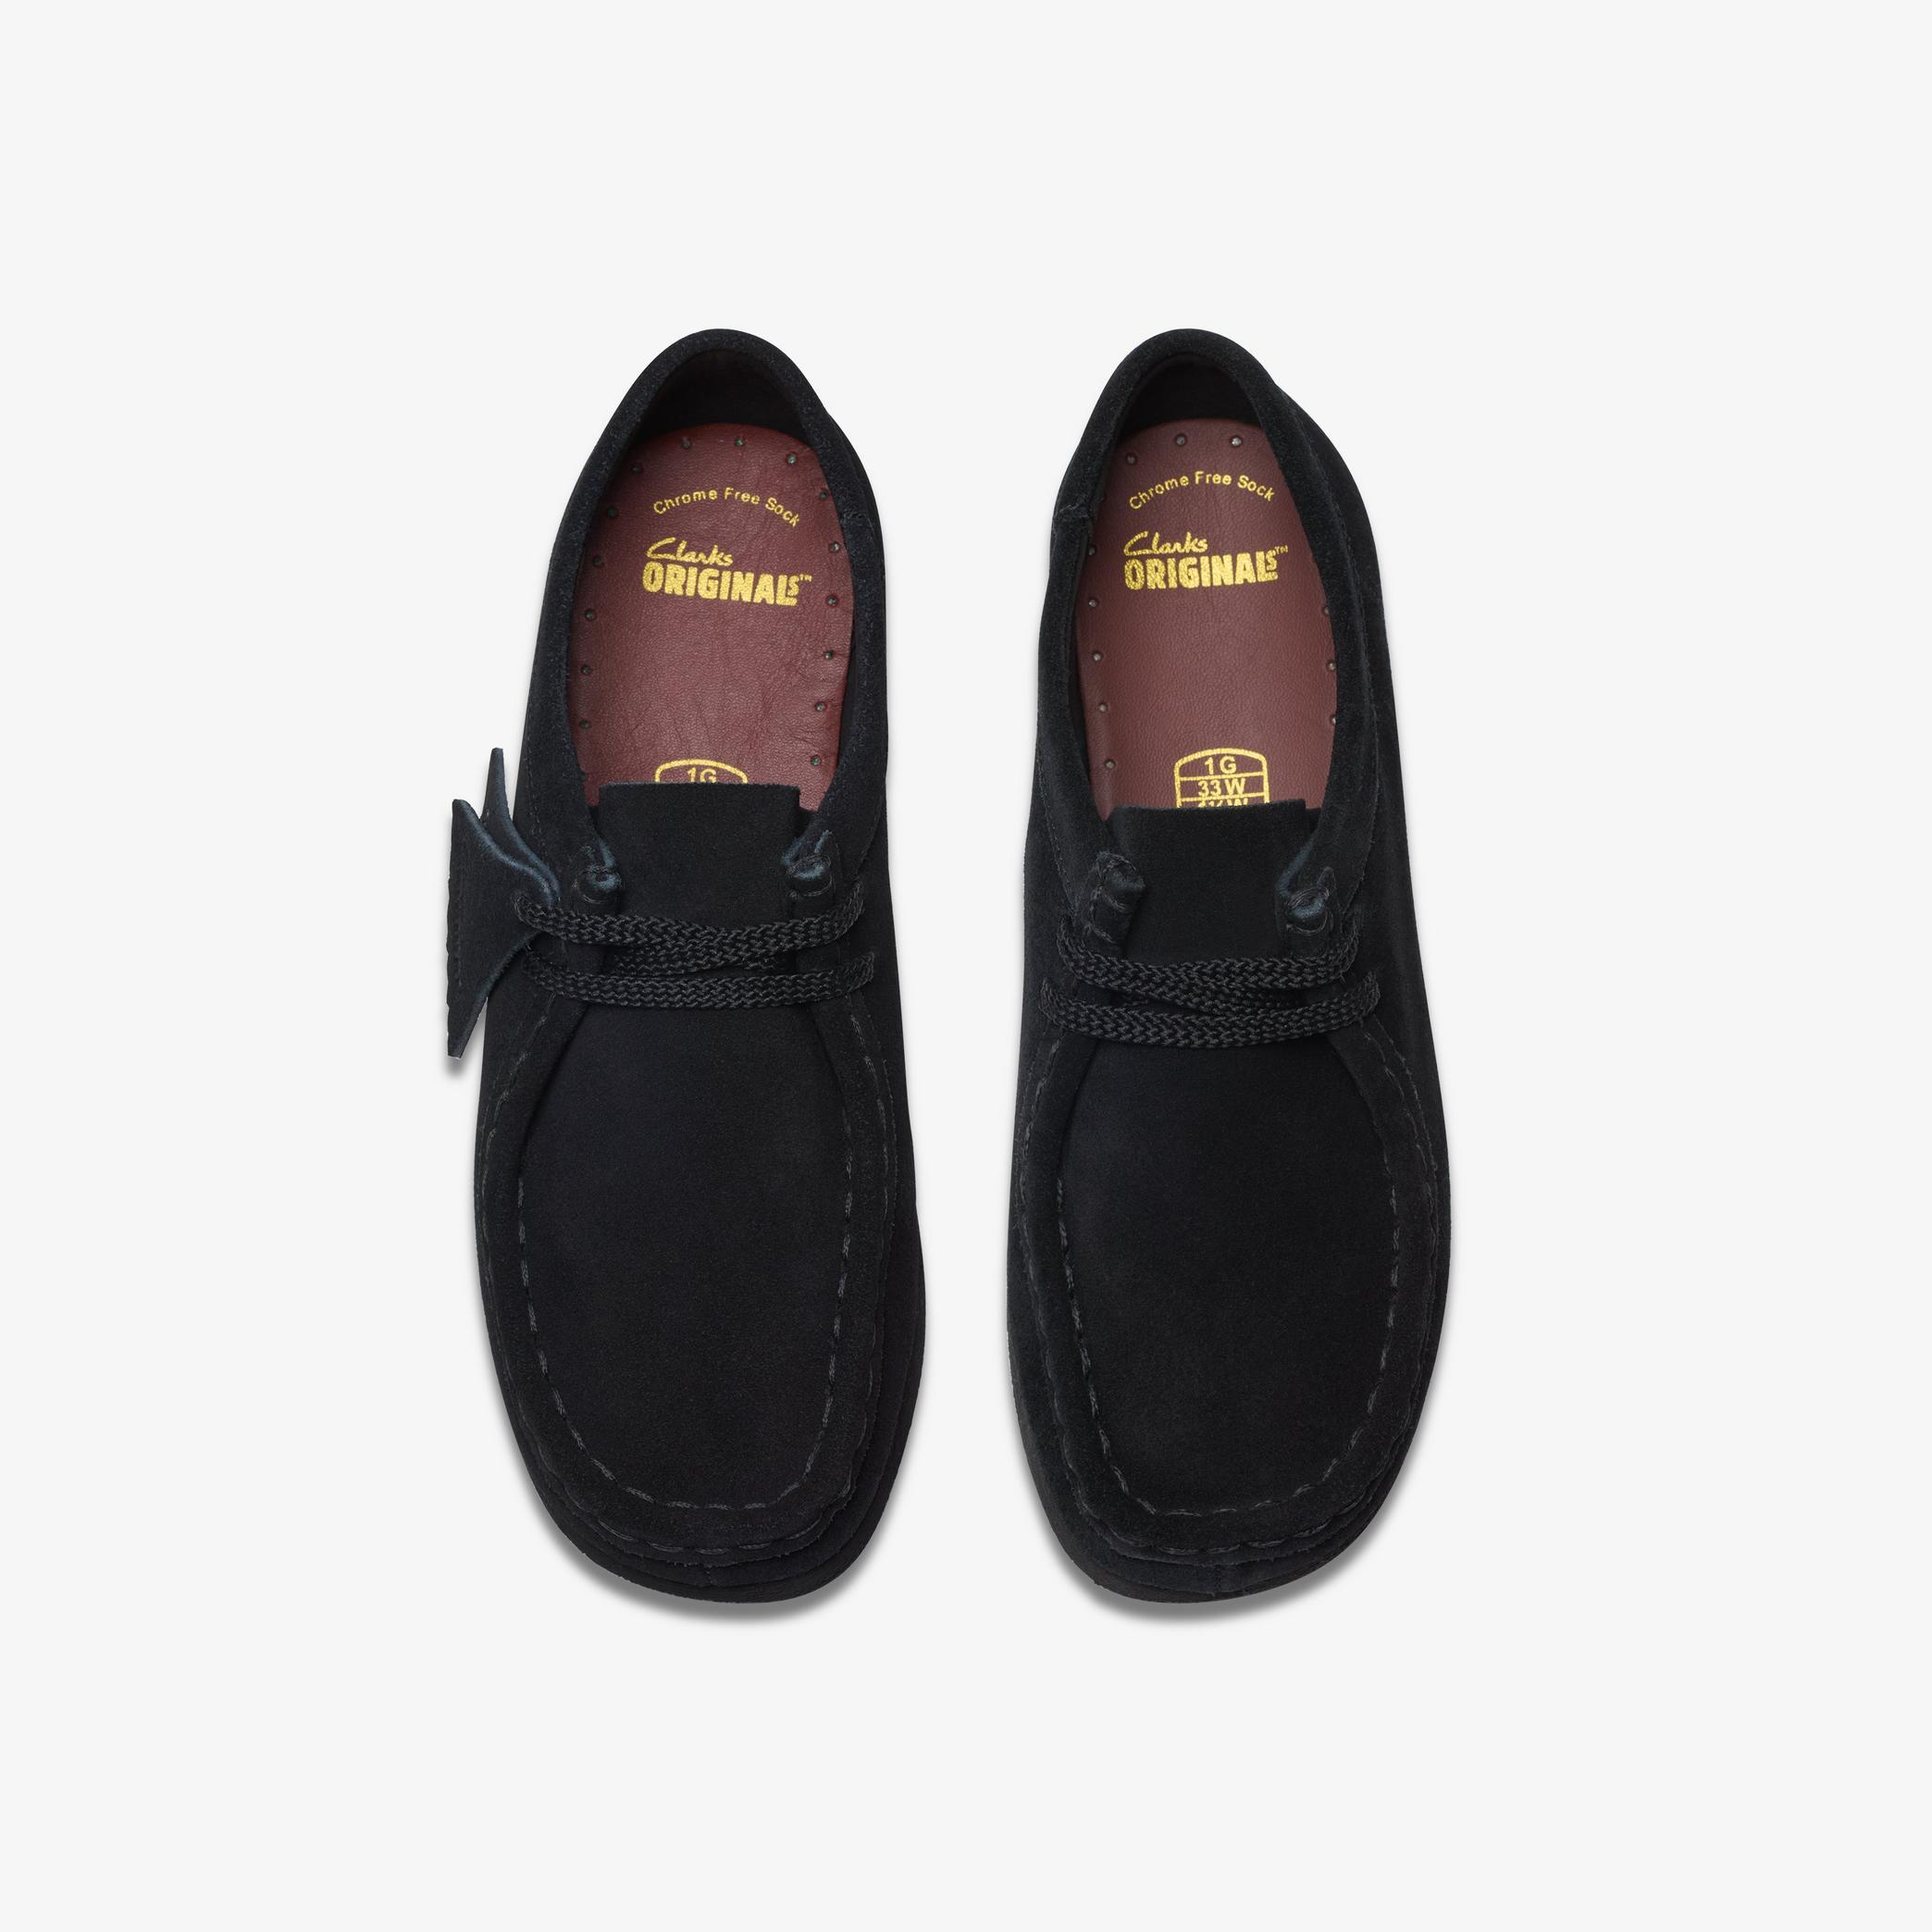 Wallabee Older Black Suede Shoes, view 6 of 6